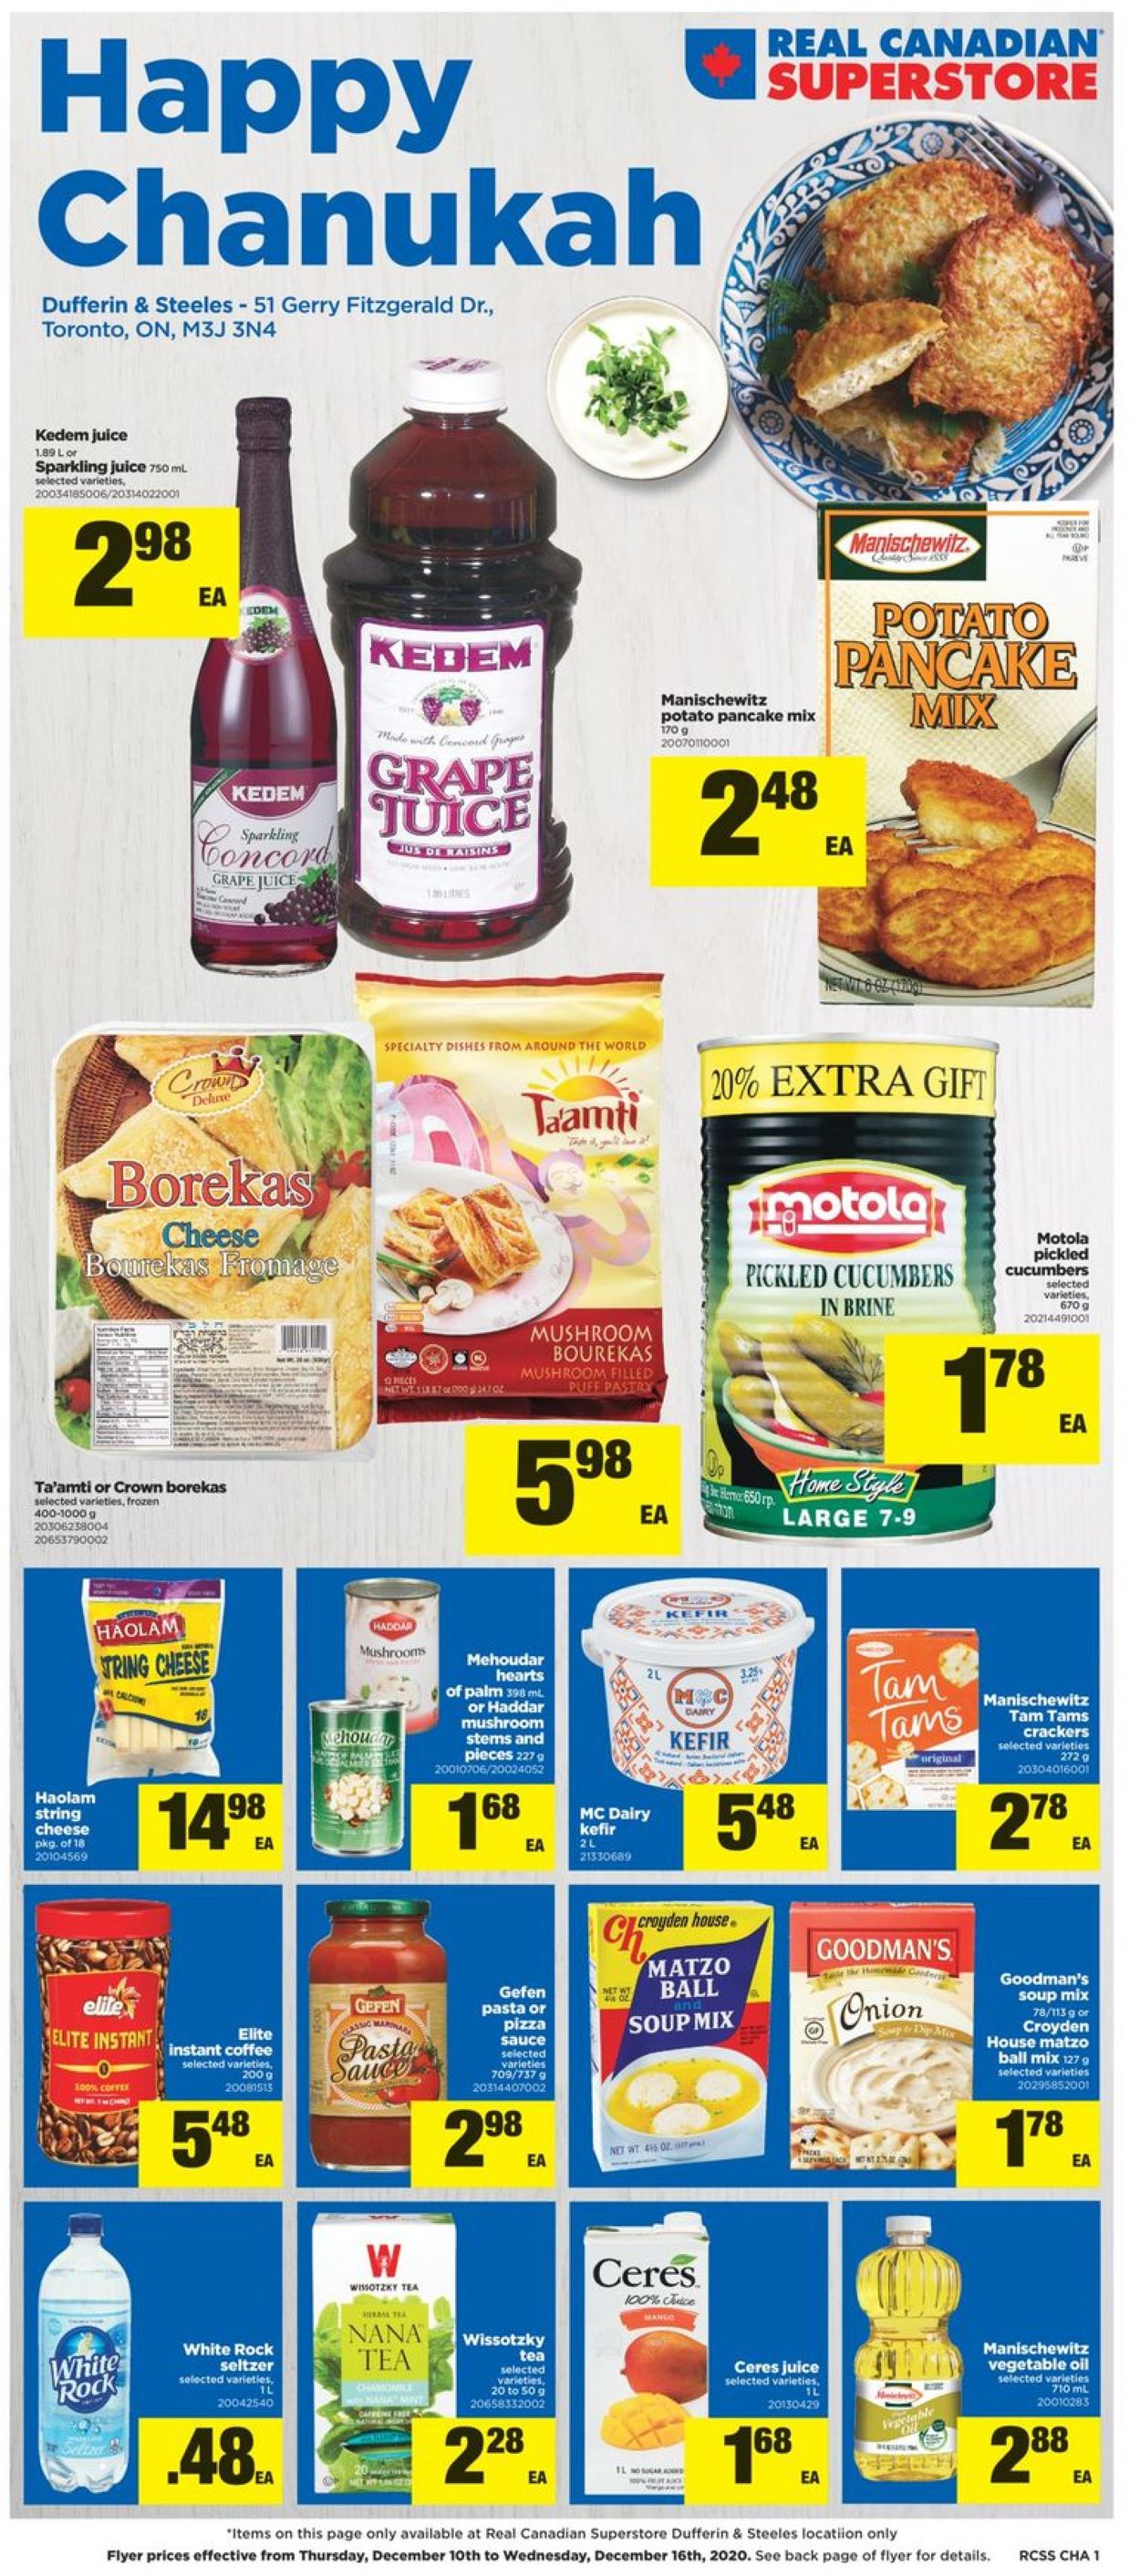 Real Canadian Superstore - Chanukah 2020 Flyer - 12/10-12/16/2020